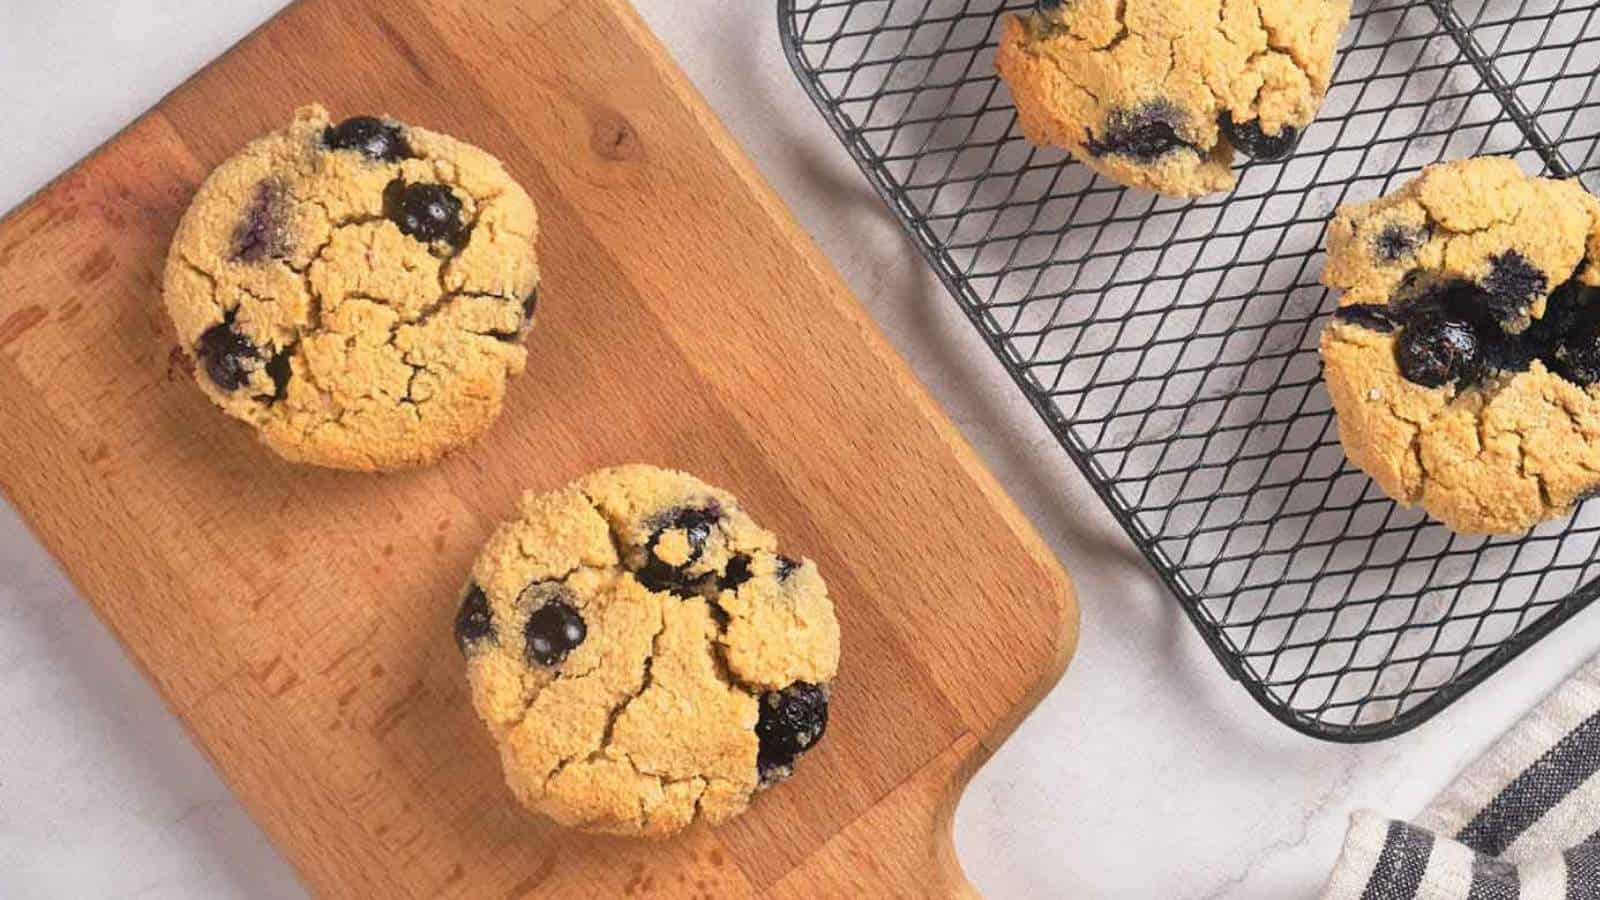 Four blueberry scones, some on a wooden cutting board and others on a cooling rack.